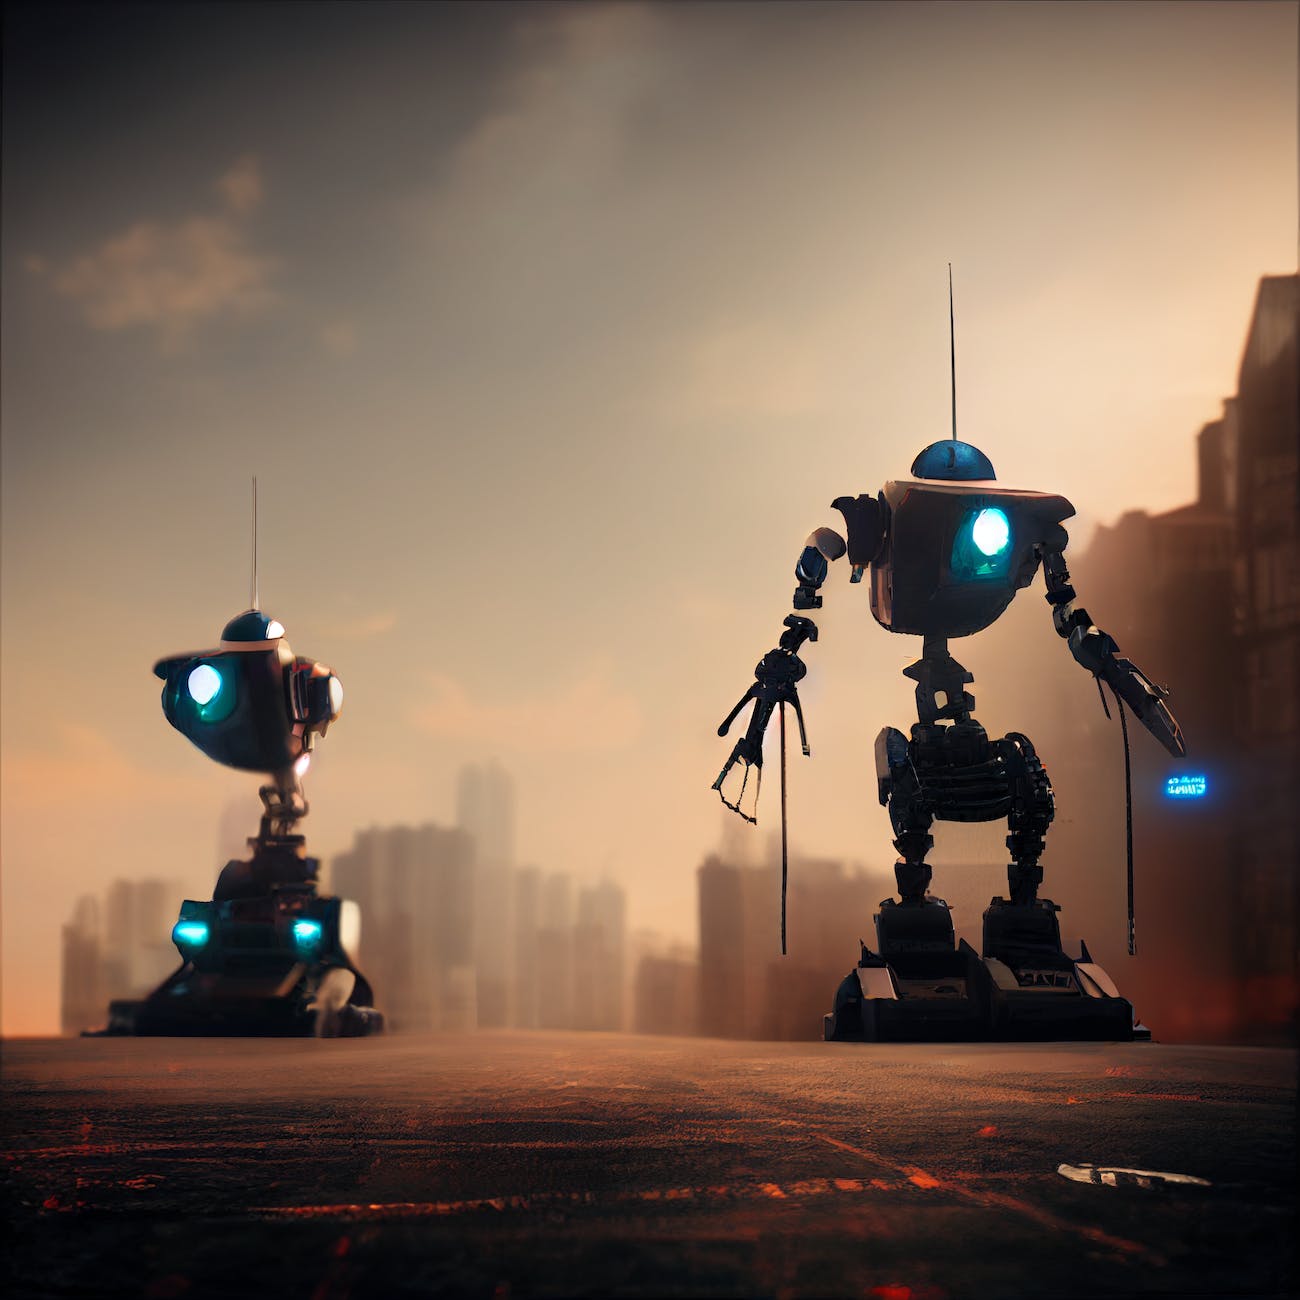 humanoid robots standing on path with cityscape in background